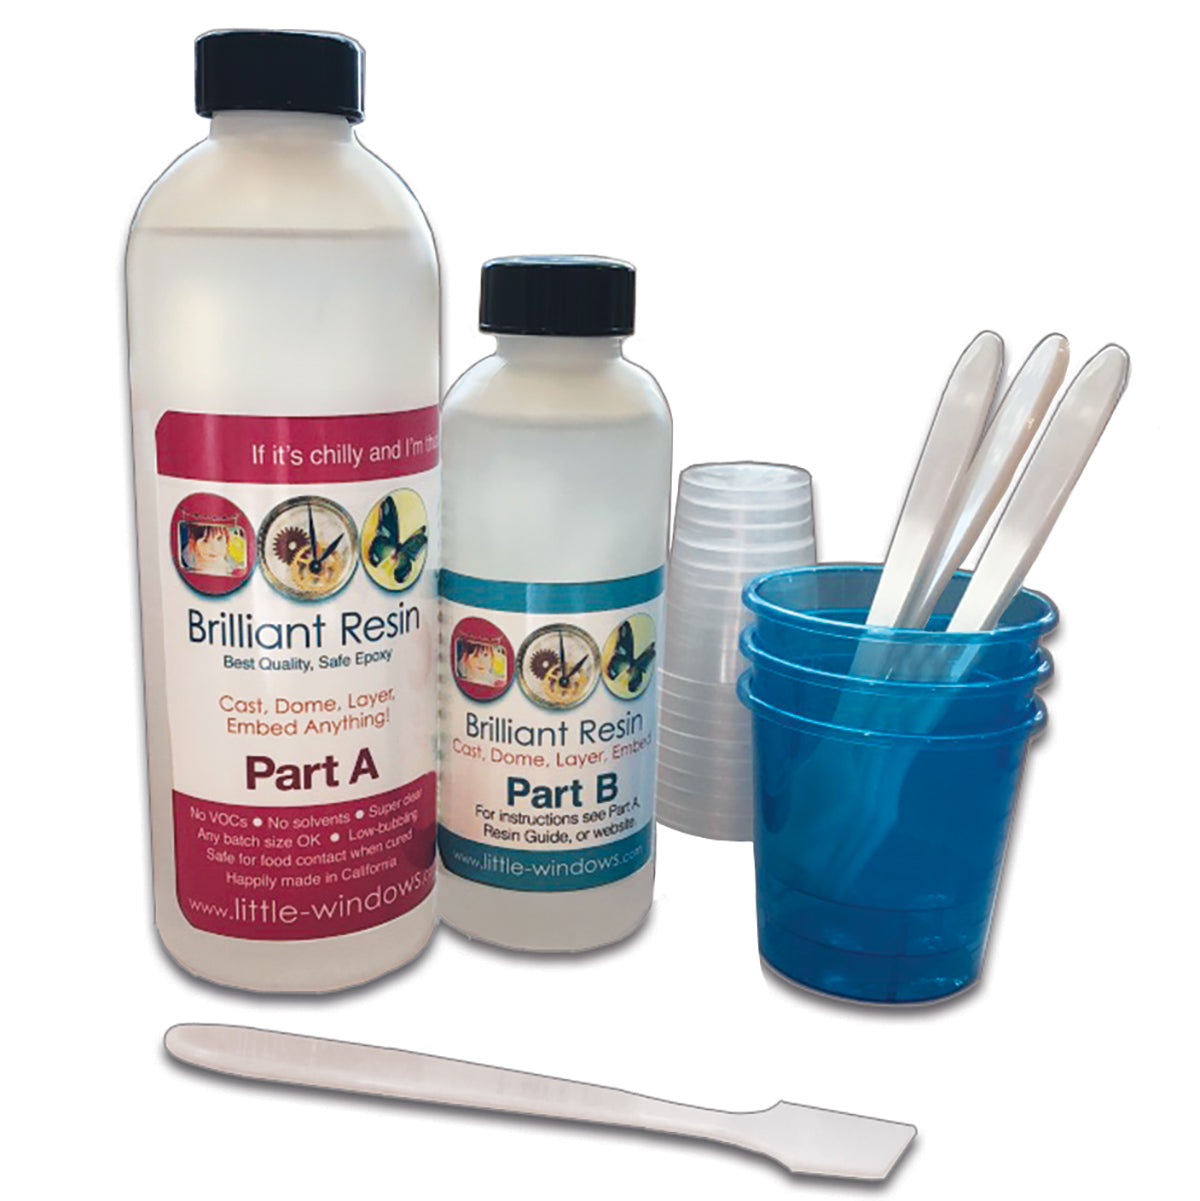 What Art Projects Is Craft Resin's Epoxy Resin Best For?